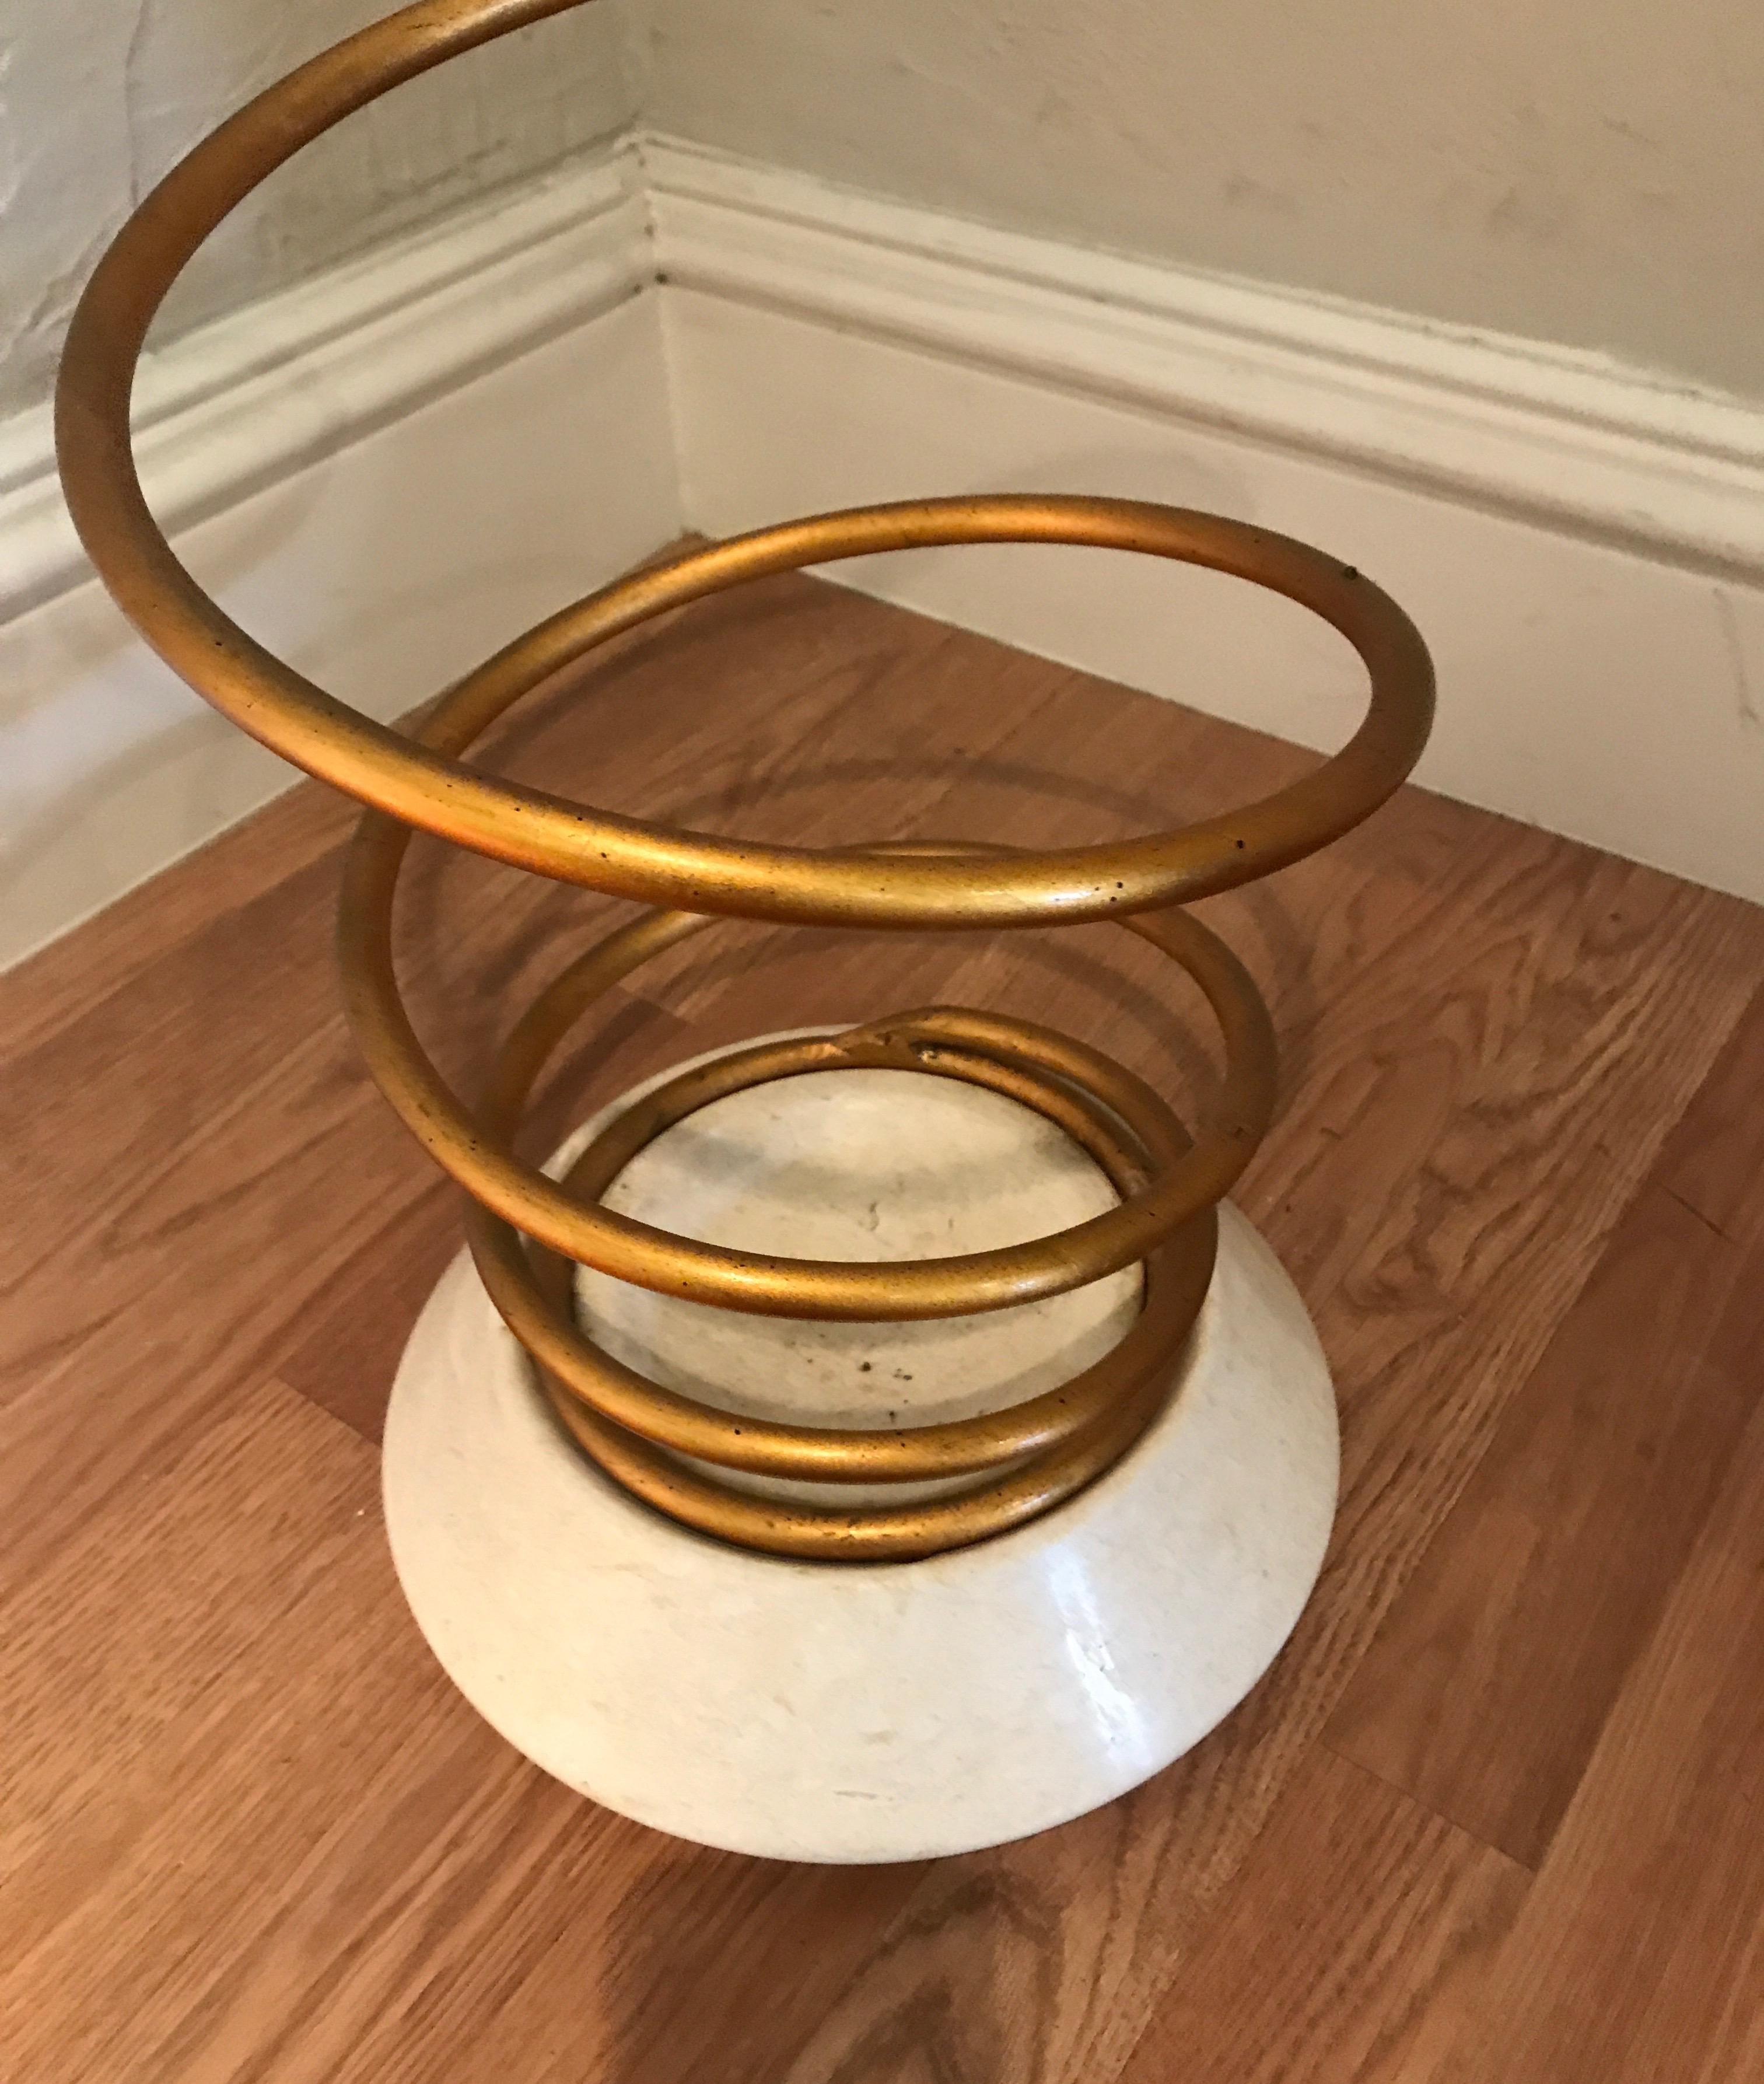 Gold metal spiral umbrella stand by Bunny Williams in the midcentury style of Dorothy Thorpe.